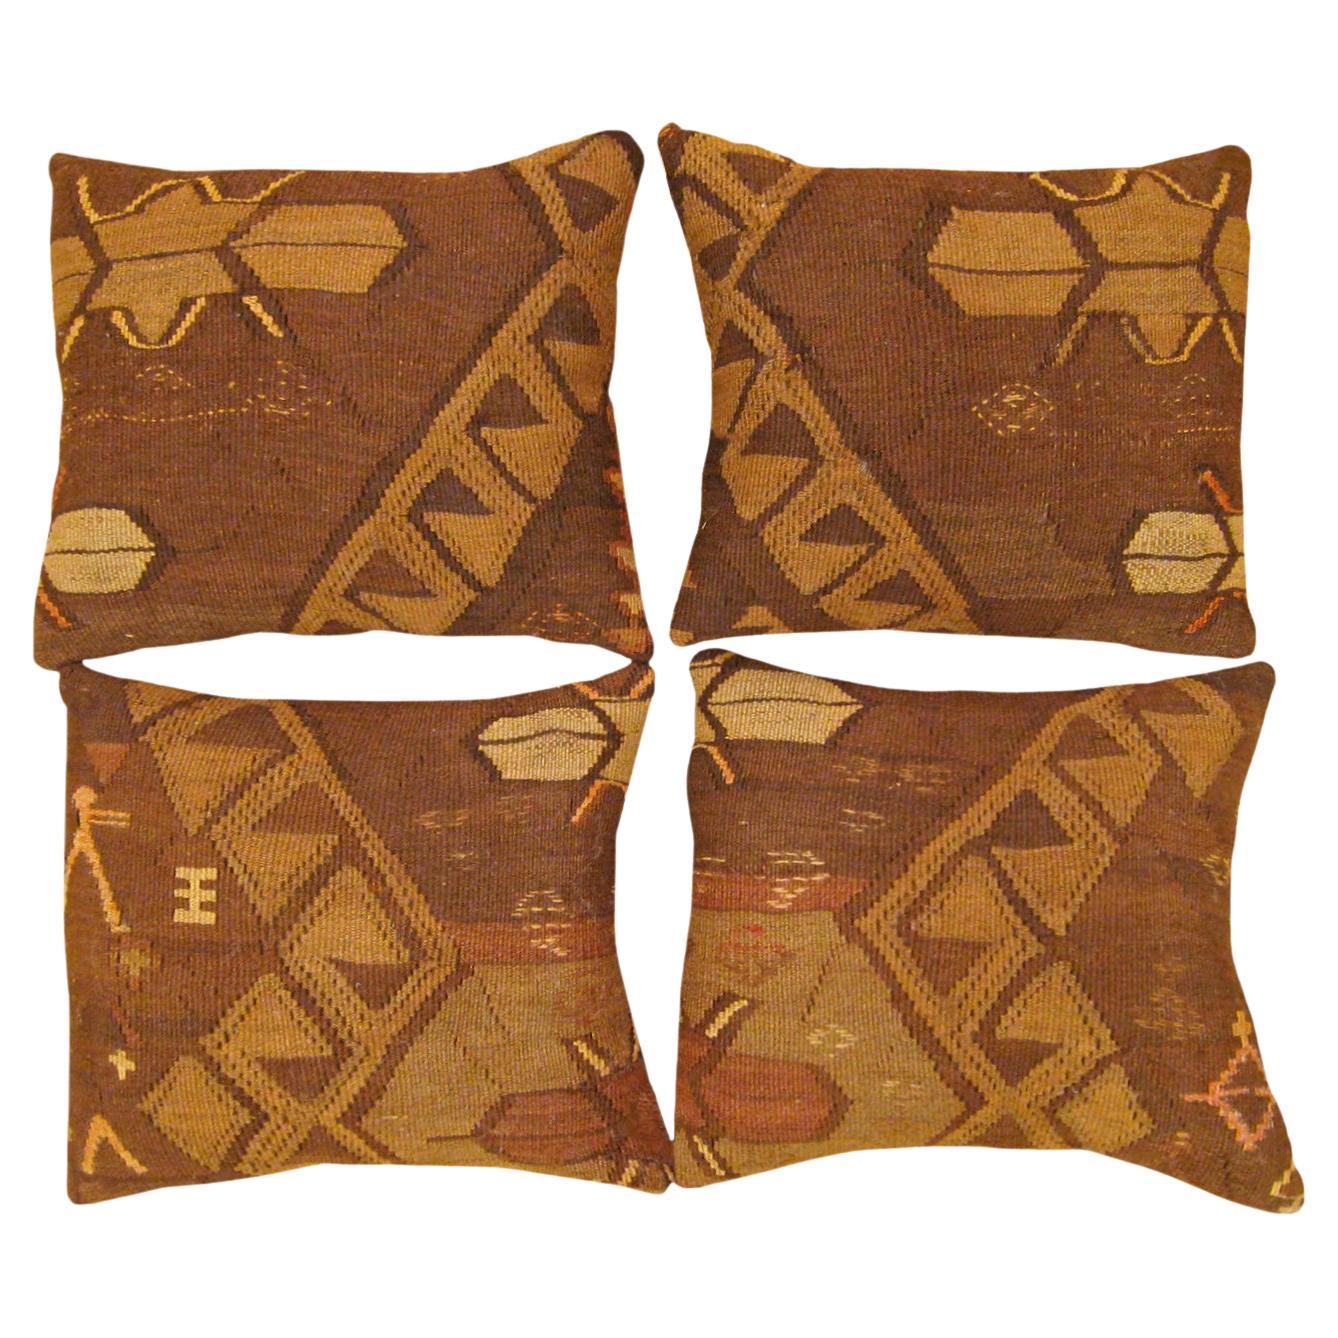 A Set of Decorative Vintage Turkish Kilim Pillows with Geometric Abstracts